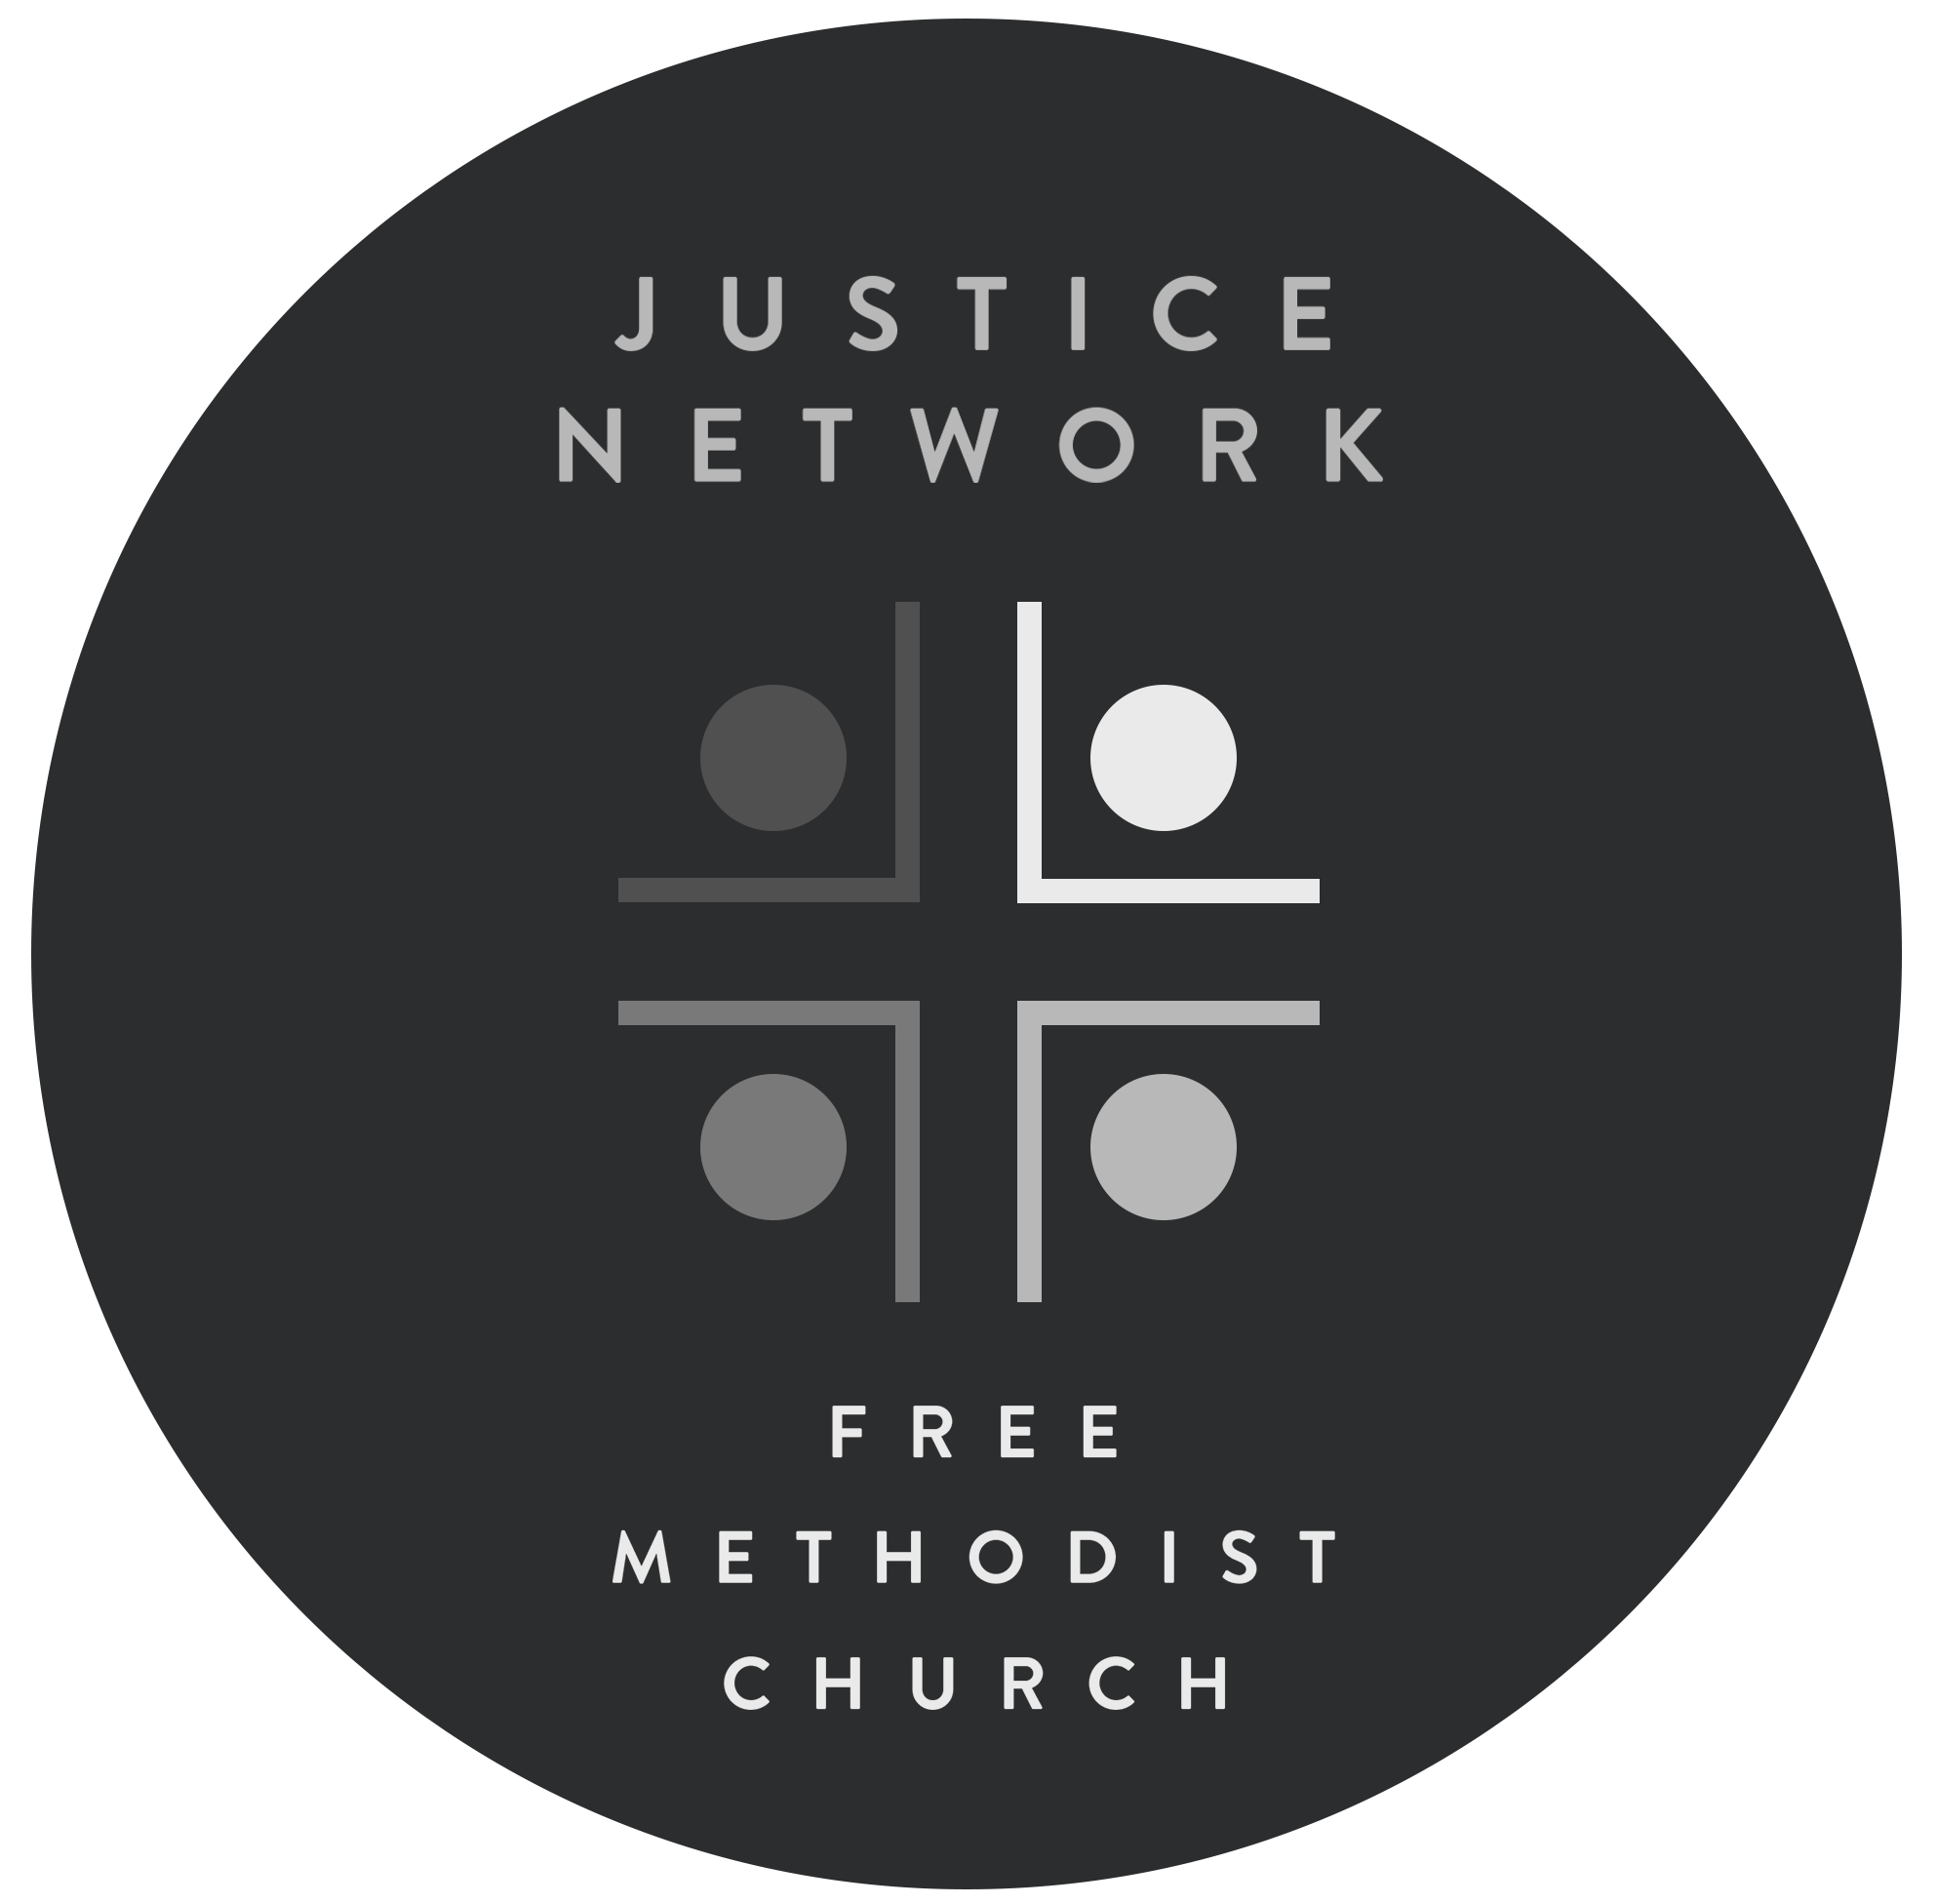 Justice Network of the Free Methodist Church